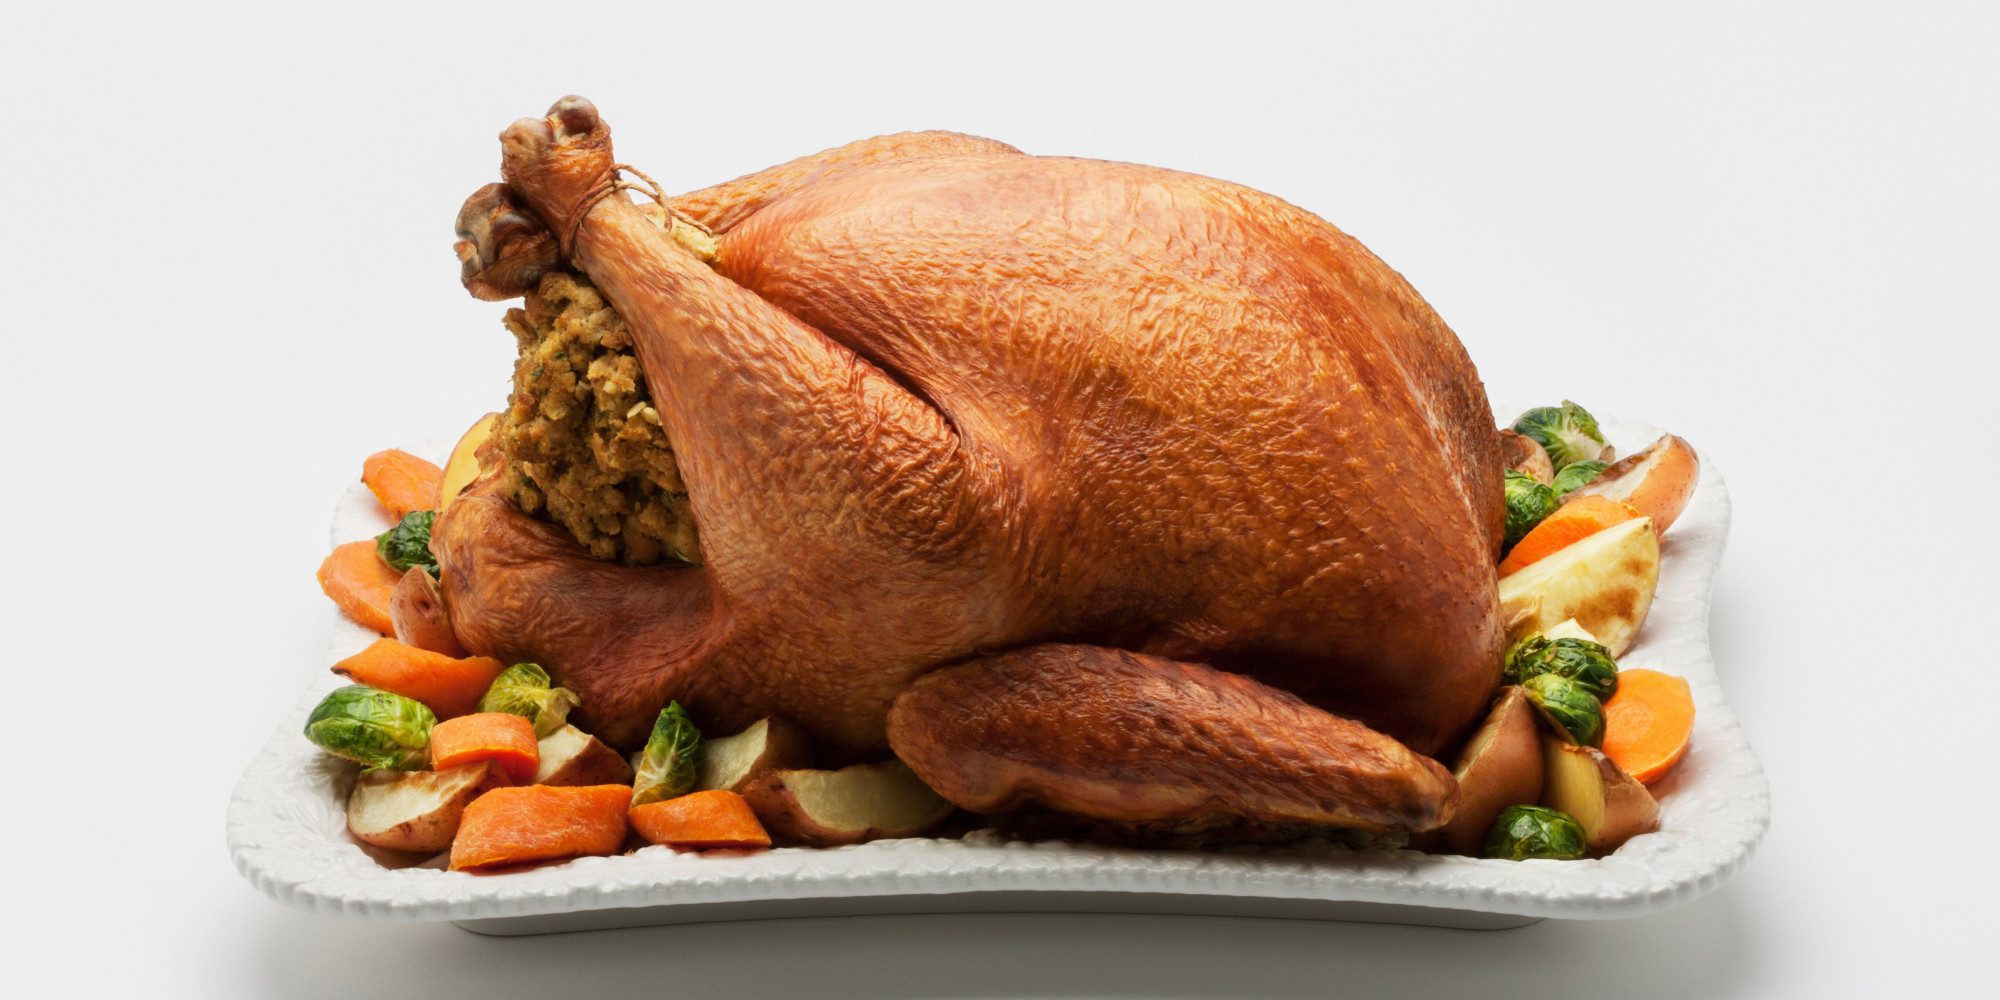 Picture Of Thanksgiving Turkey
 Tryptophan Making You Sleepy Is A Big Fat Lie